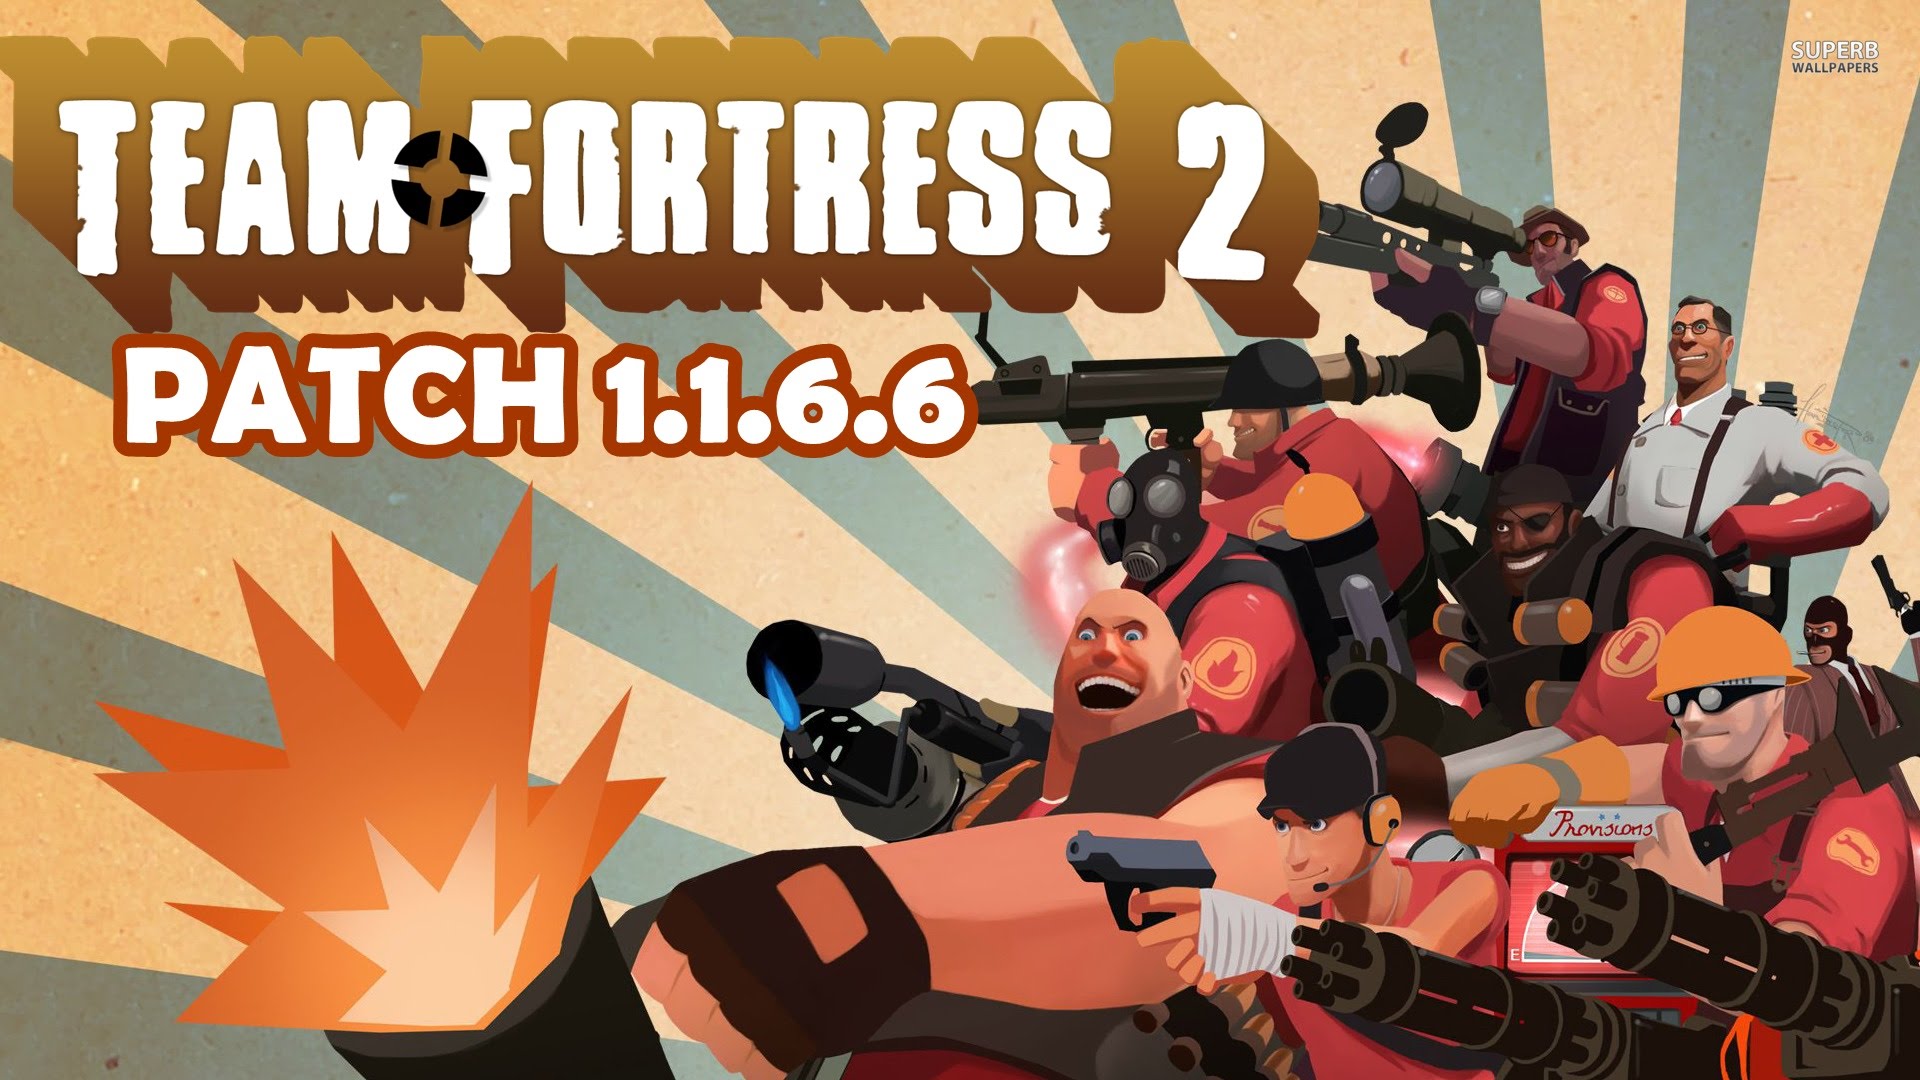 Team fortress 2 non-steam patch v1.1.6.6 download